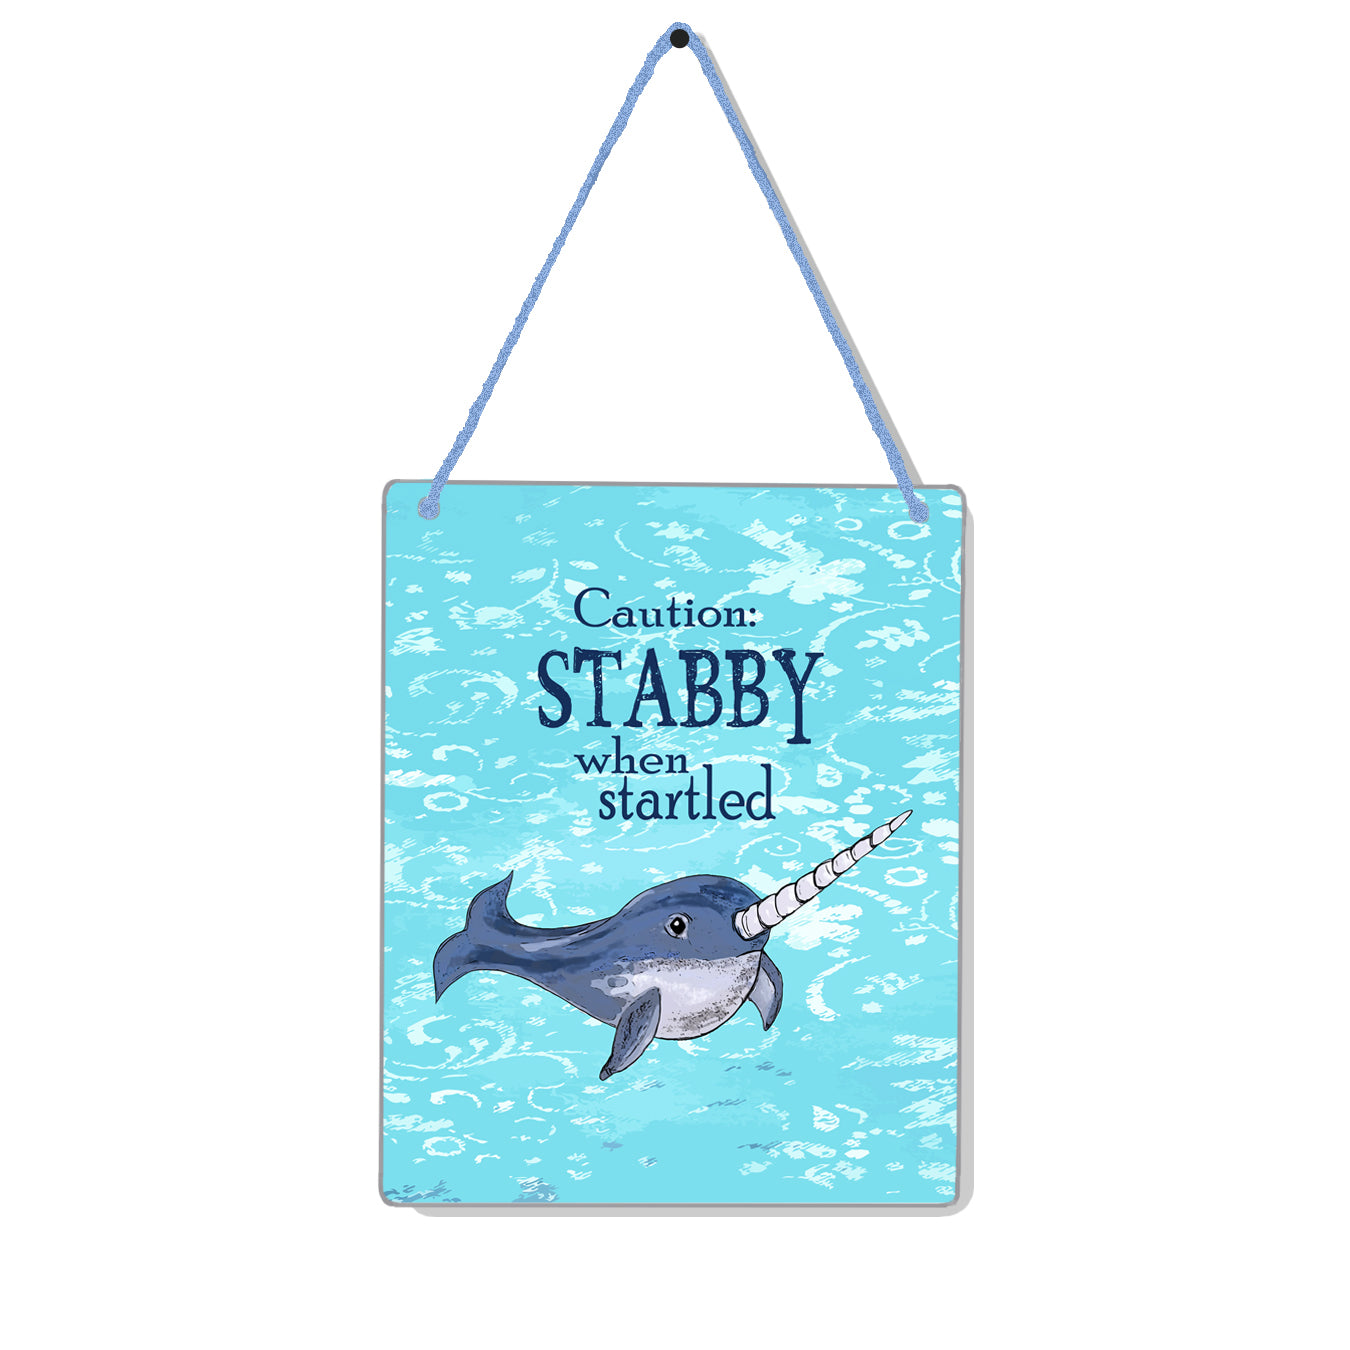 Stabby Narwhal 4x5